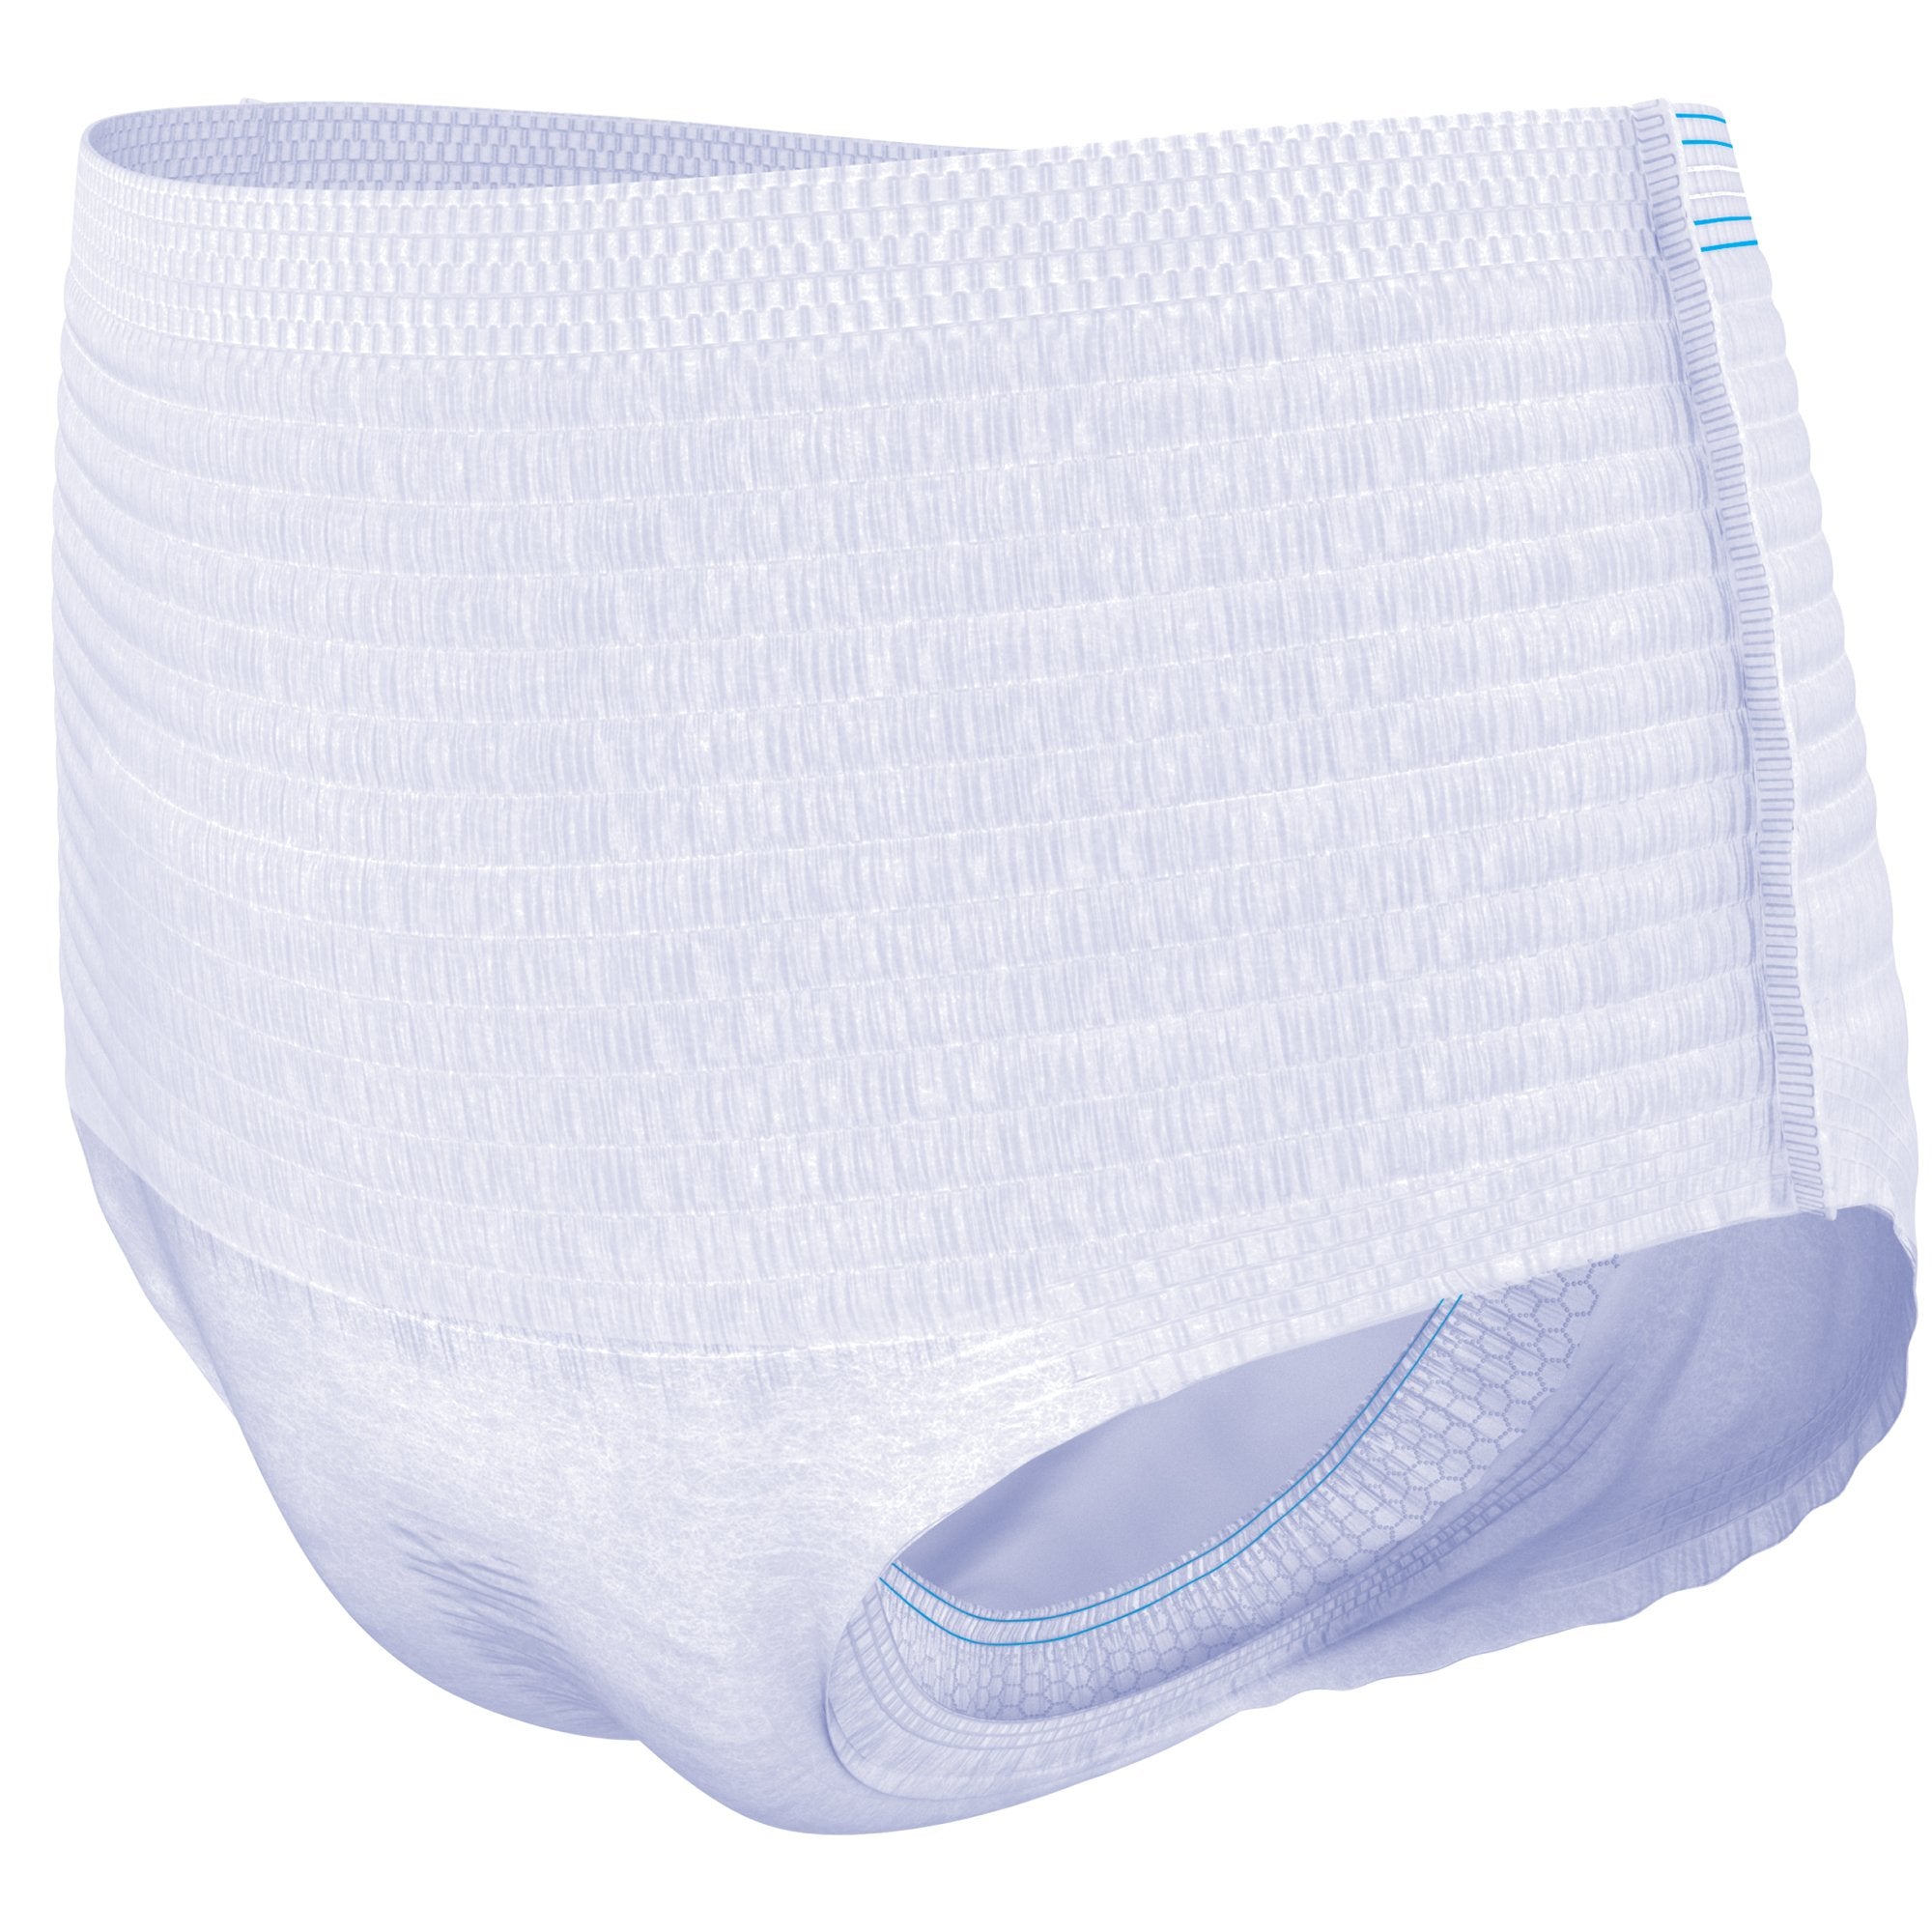 Unisex Adult Absorbent Underwear TENA® ProSkin™ Overnight Super Protective Pull On with Tear Away Seams X-Large Disposable Heavy Absorbency